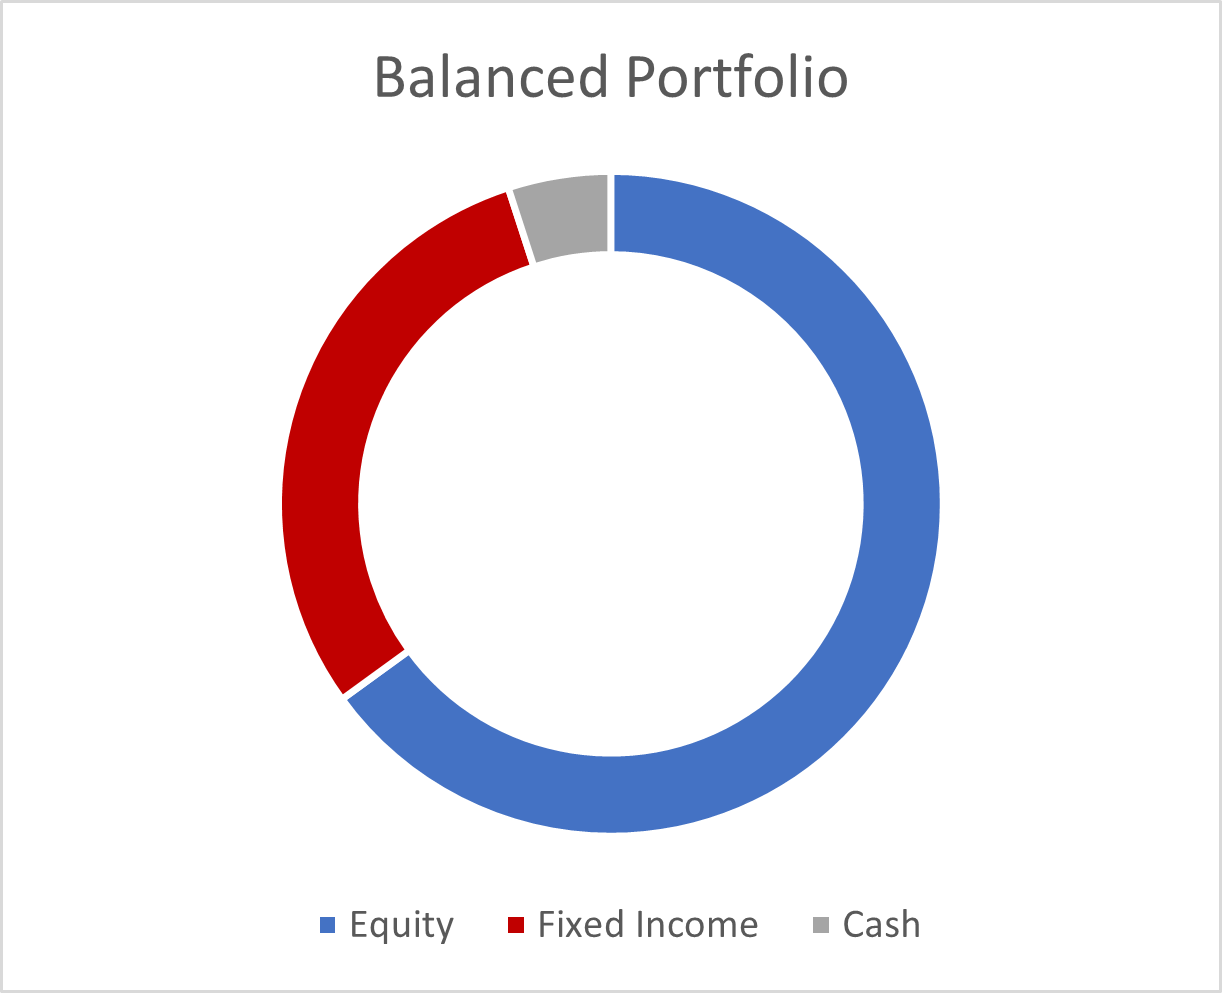 A graph of a balanced portfolio with equity (60-65%), fixed income (30-35%) and cash (5%).